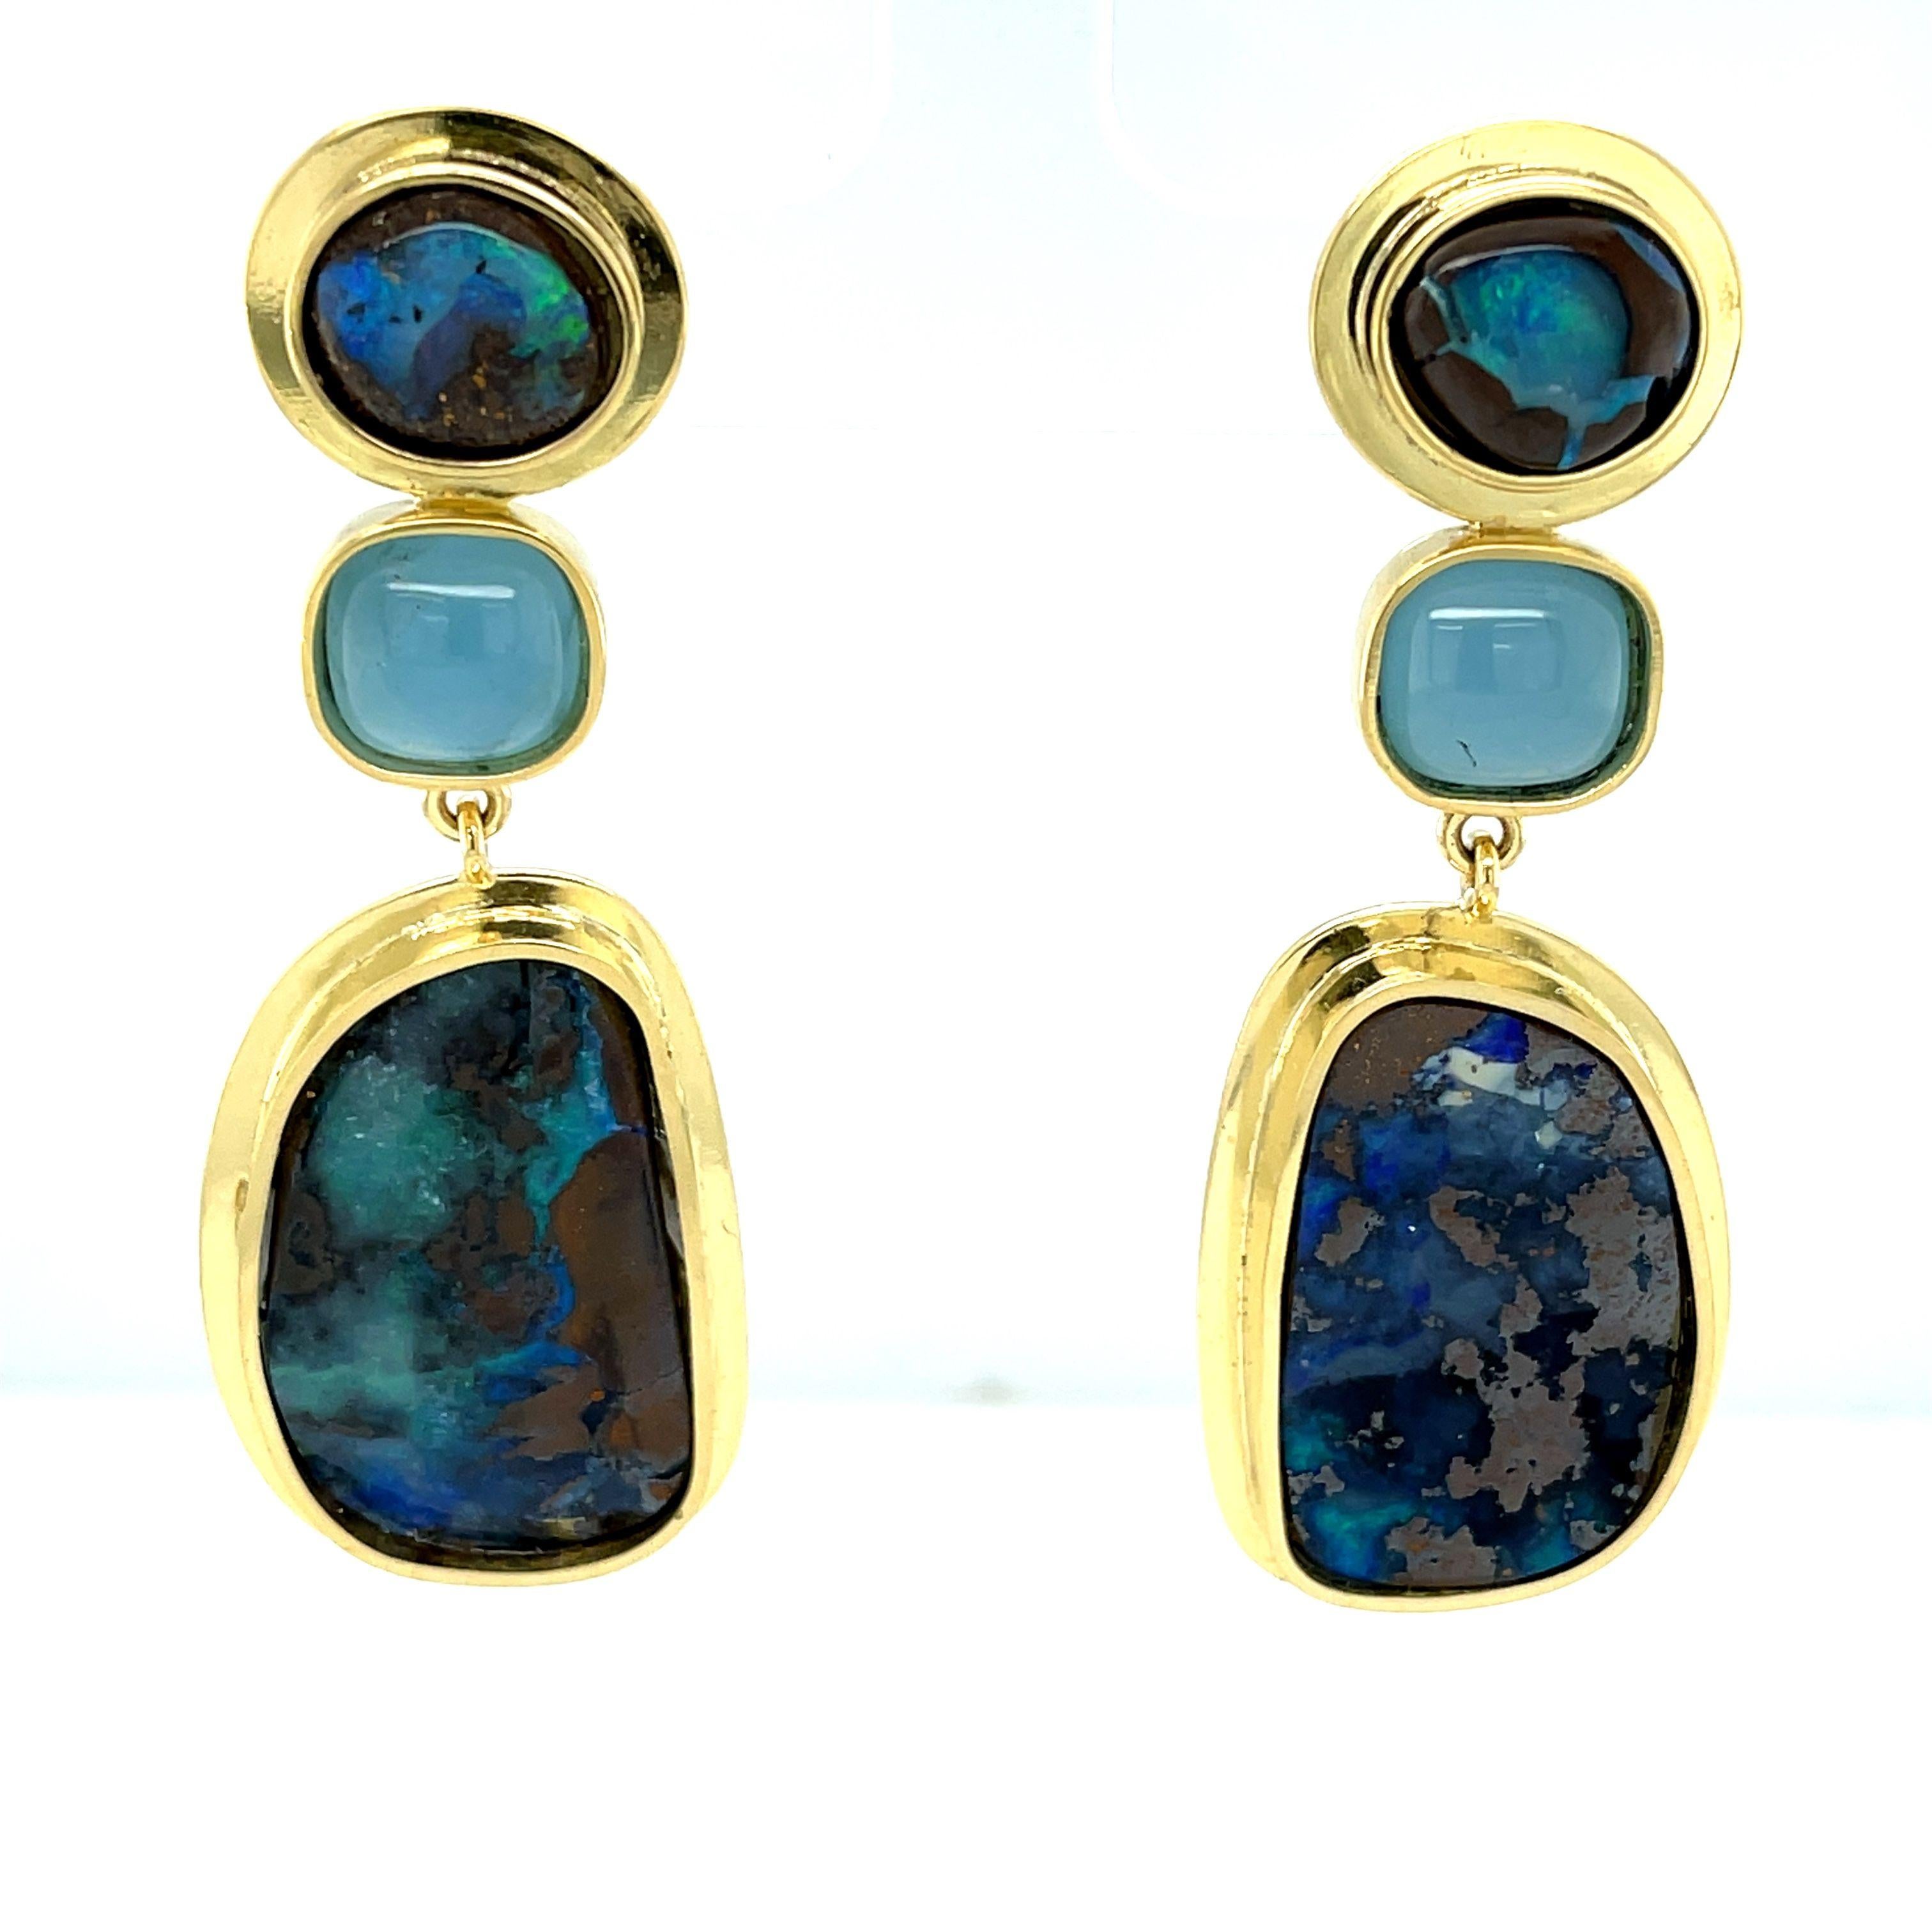 These one-of-a-kind boulder opal earrings have a truly organic feel and an air of worldly sophistication! A pair of large, freeform boulder opals show off a gorgeous array of turquoise, indigo and tahitian blues against dramatic dark brown matrix.